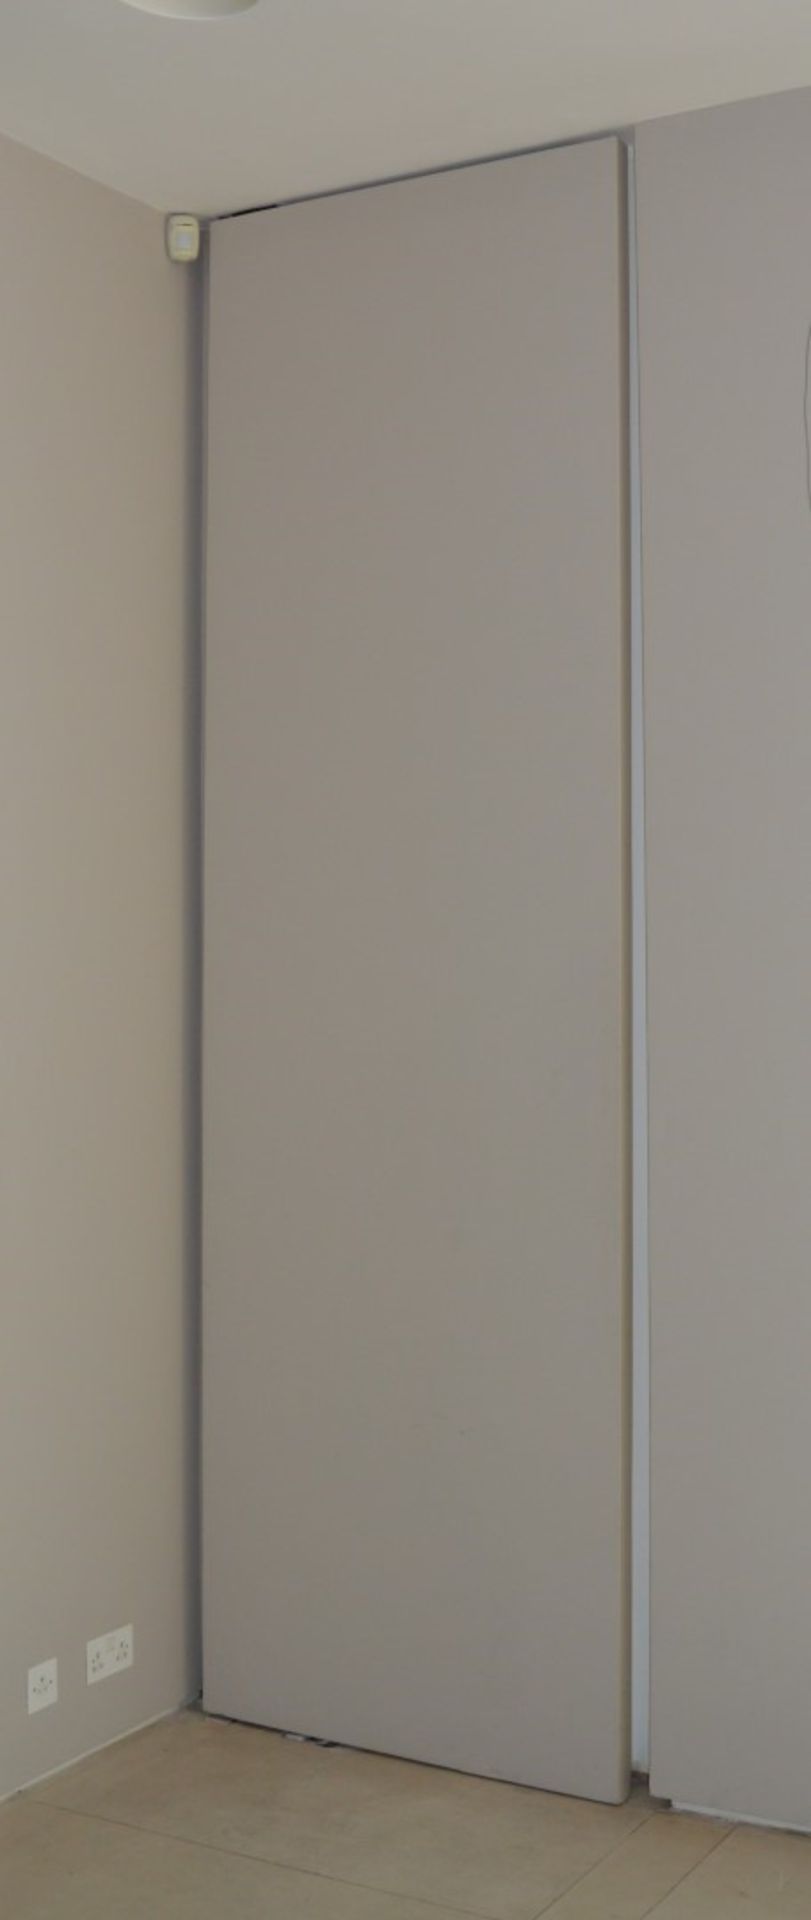 1 x Fire Resistant Internal Door - Includes Hnges - Over 10 Feet Tall - H308x W93.5 x D5.5cm - CL230 - Image 3 of 6